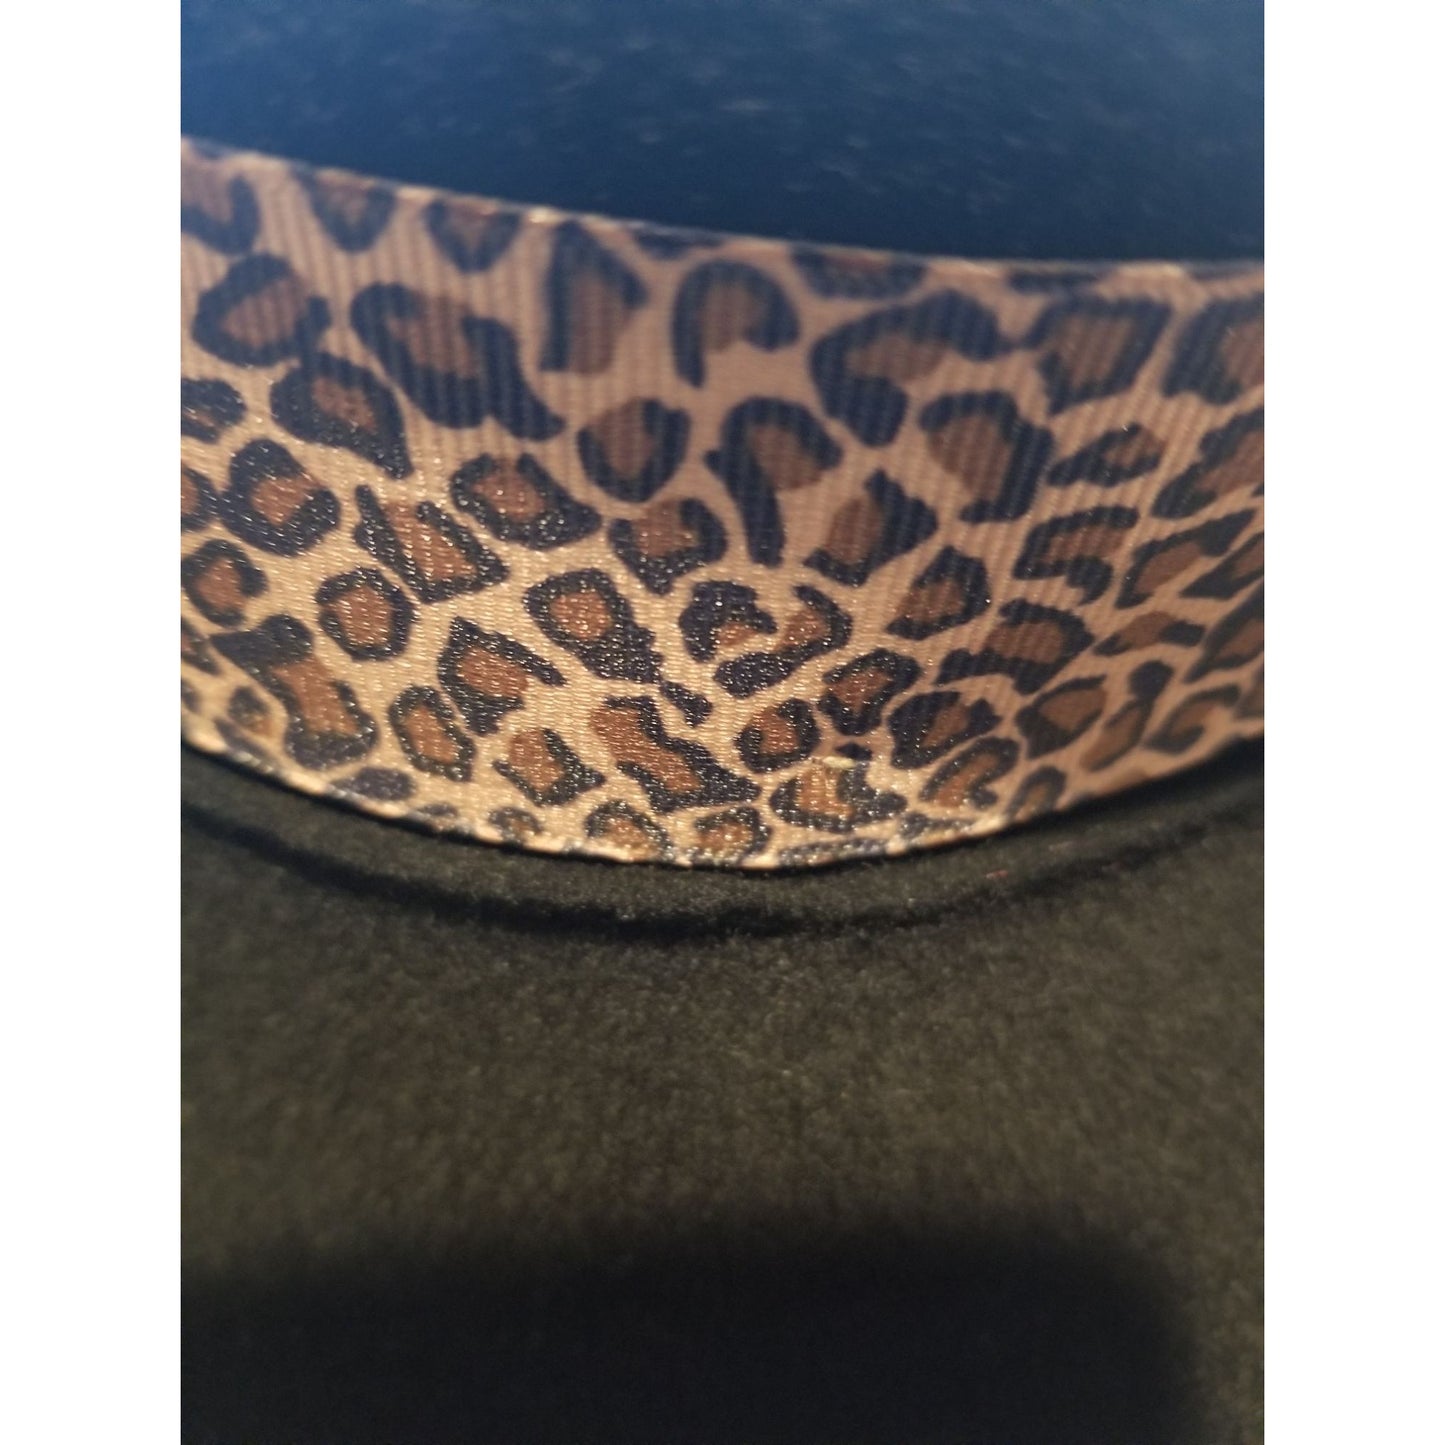 Callanan Hat Women's O/S Wide Brim Black Hat With Animal Print Pattern Bow